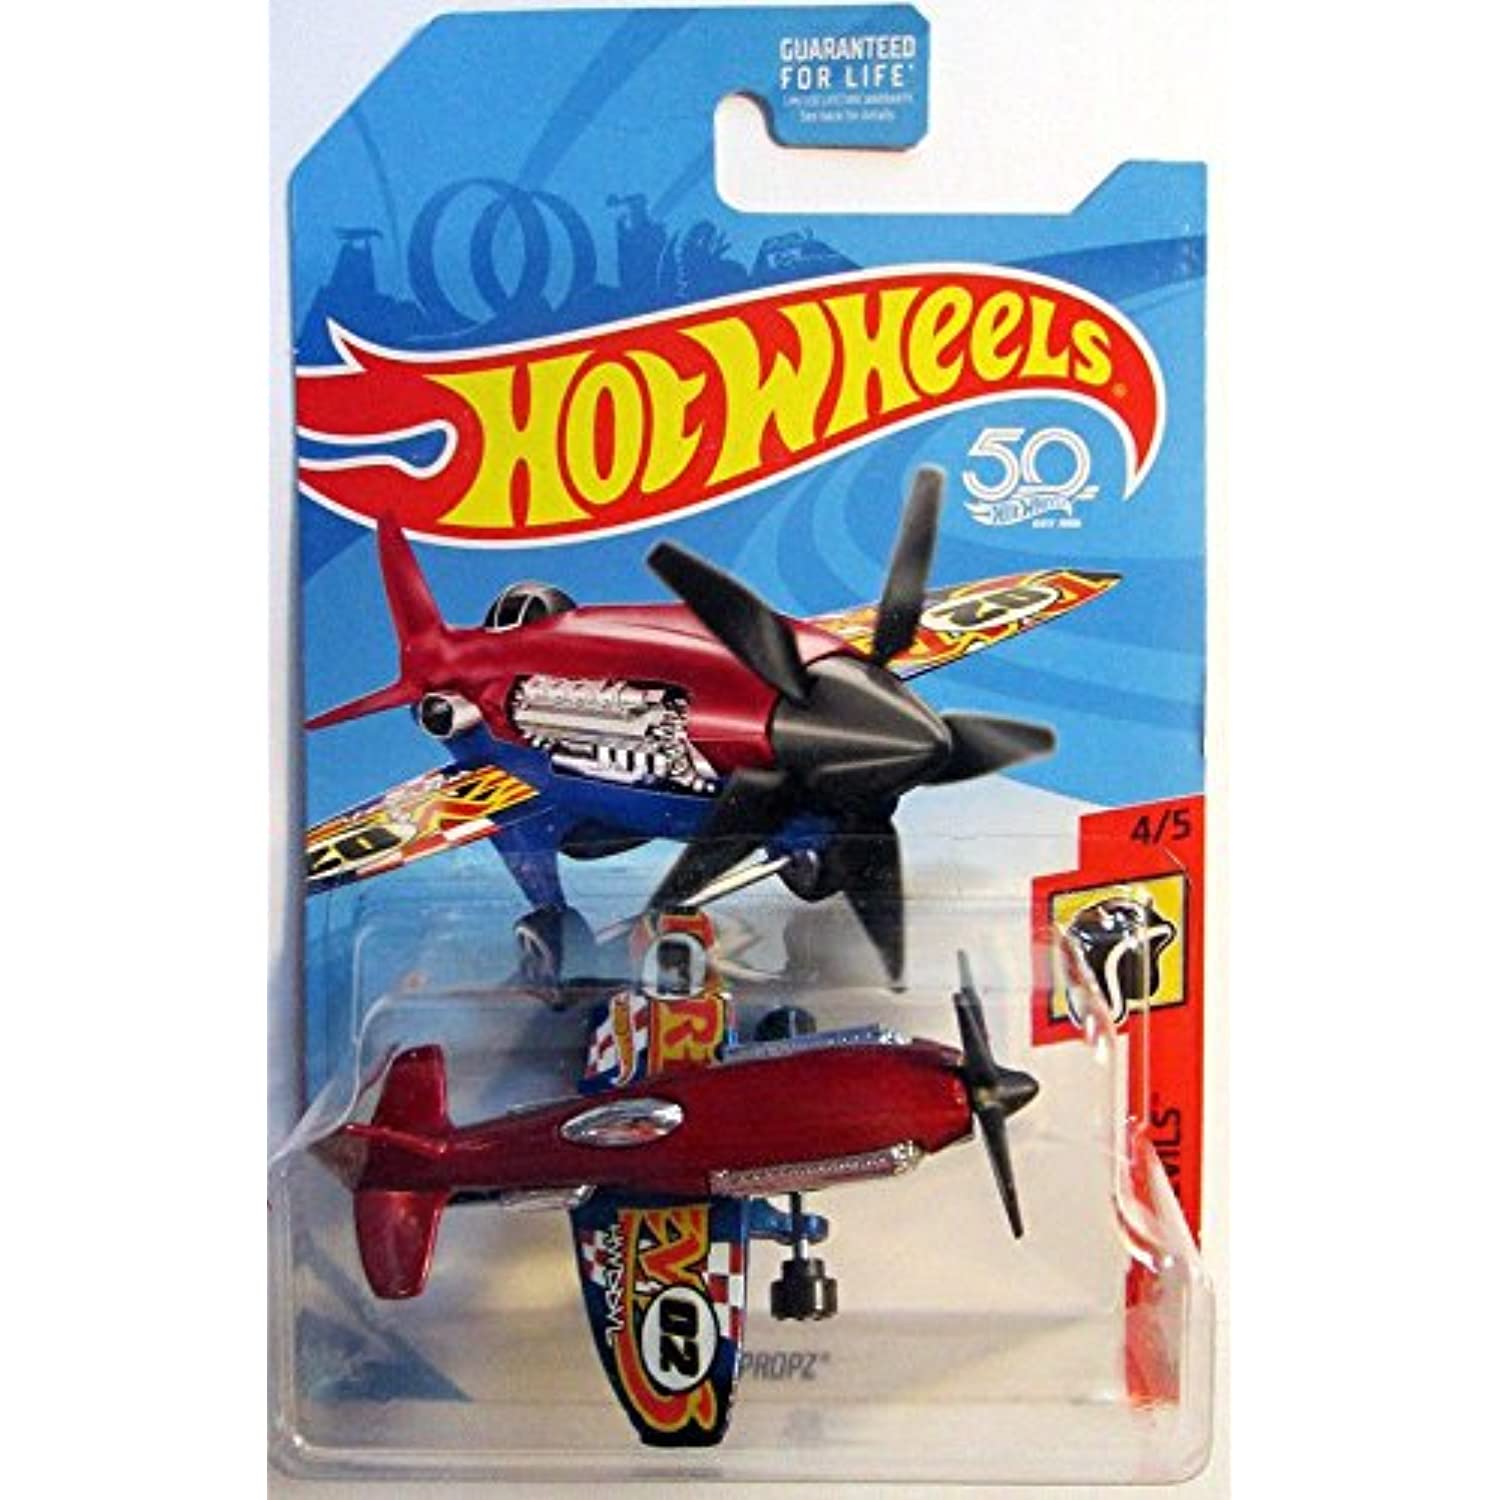 Hot Wheels 2018 50th Anniversary HW Daredevils Mad Propz (Airplane), Red and Blue